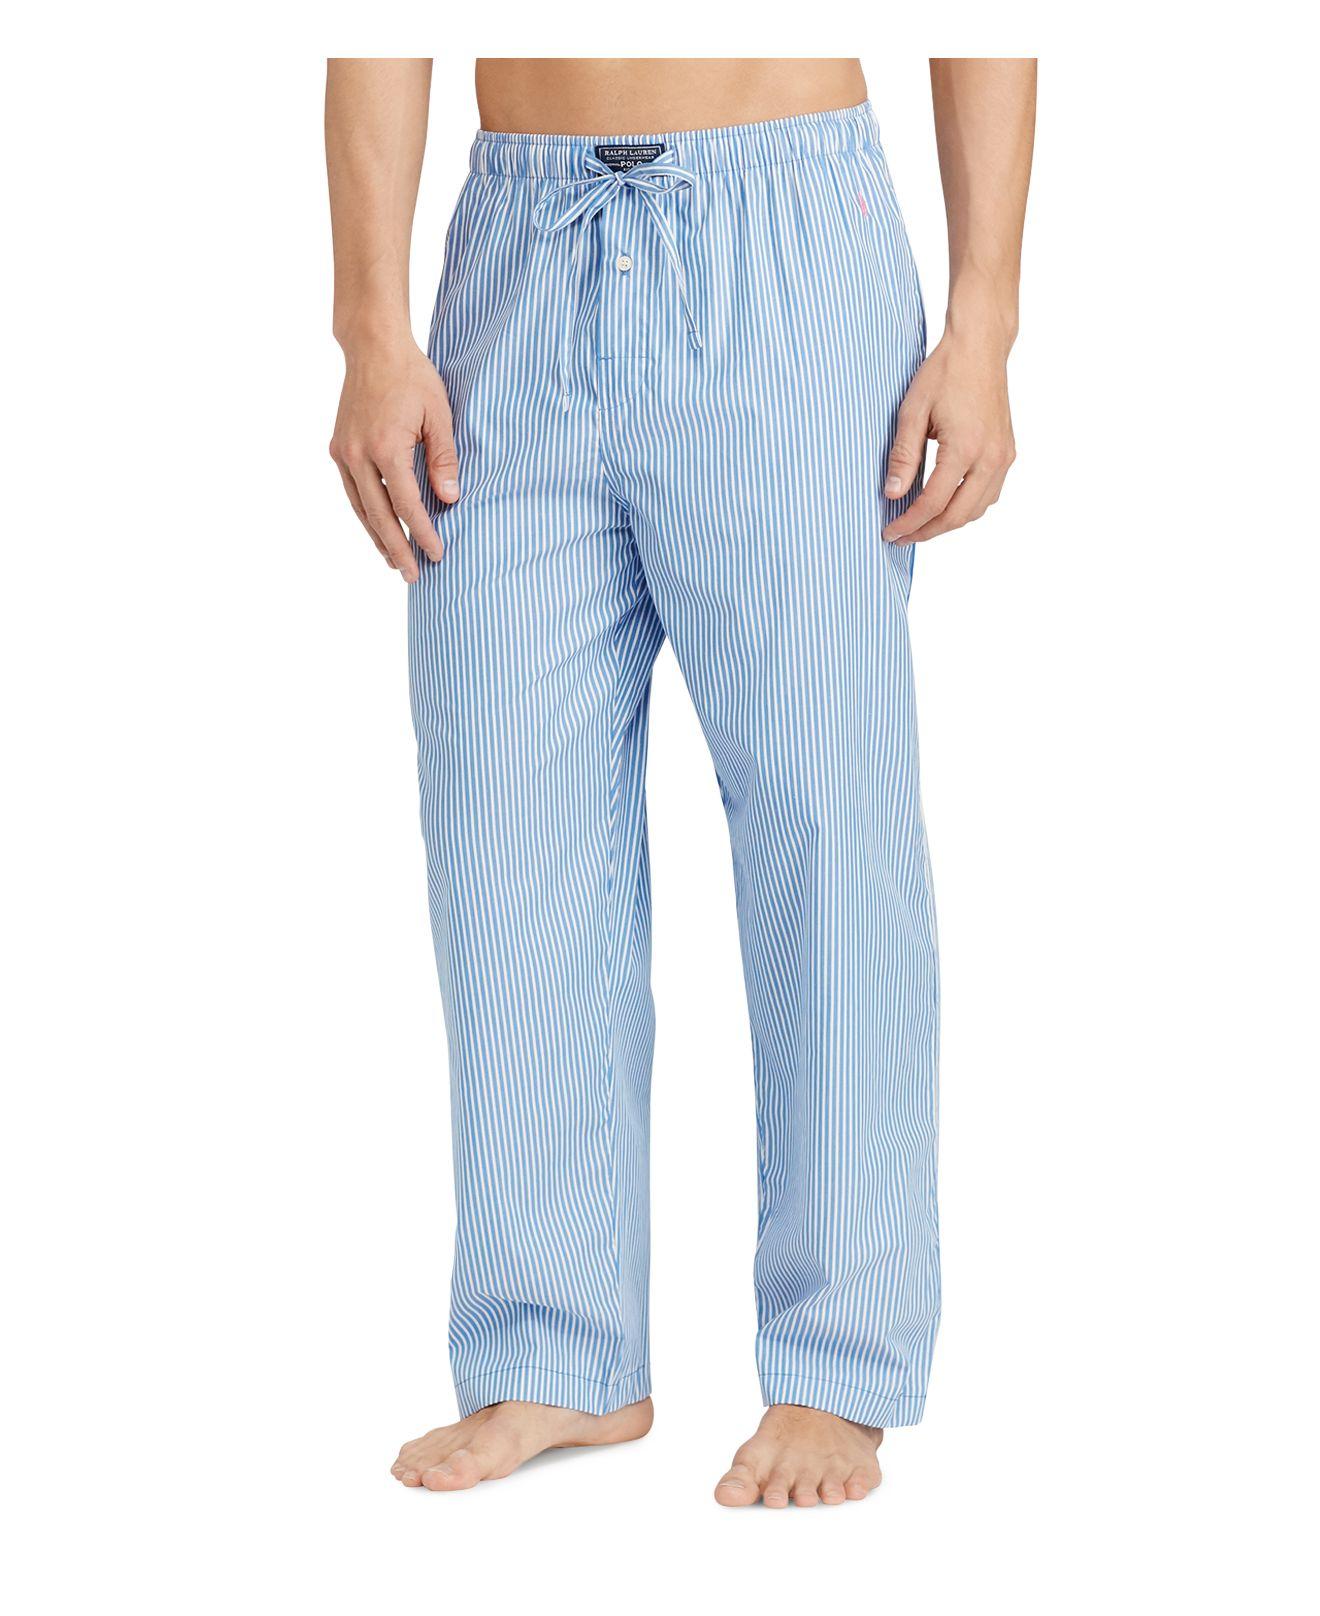 Polo ralph lauren Striped Cotton Pajama Pants in Blue for Men - Save 55 ...